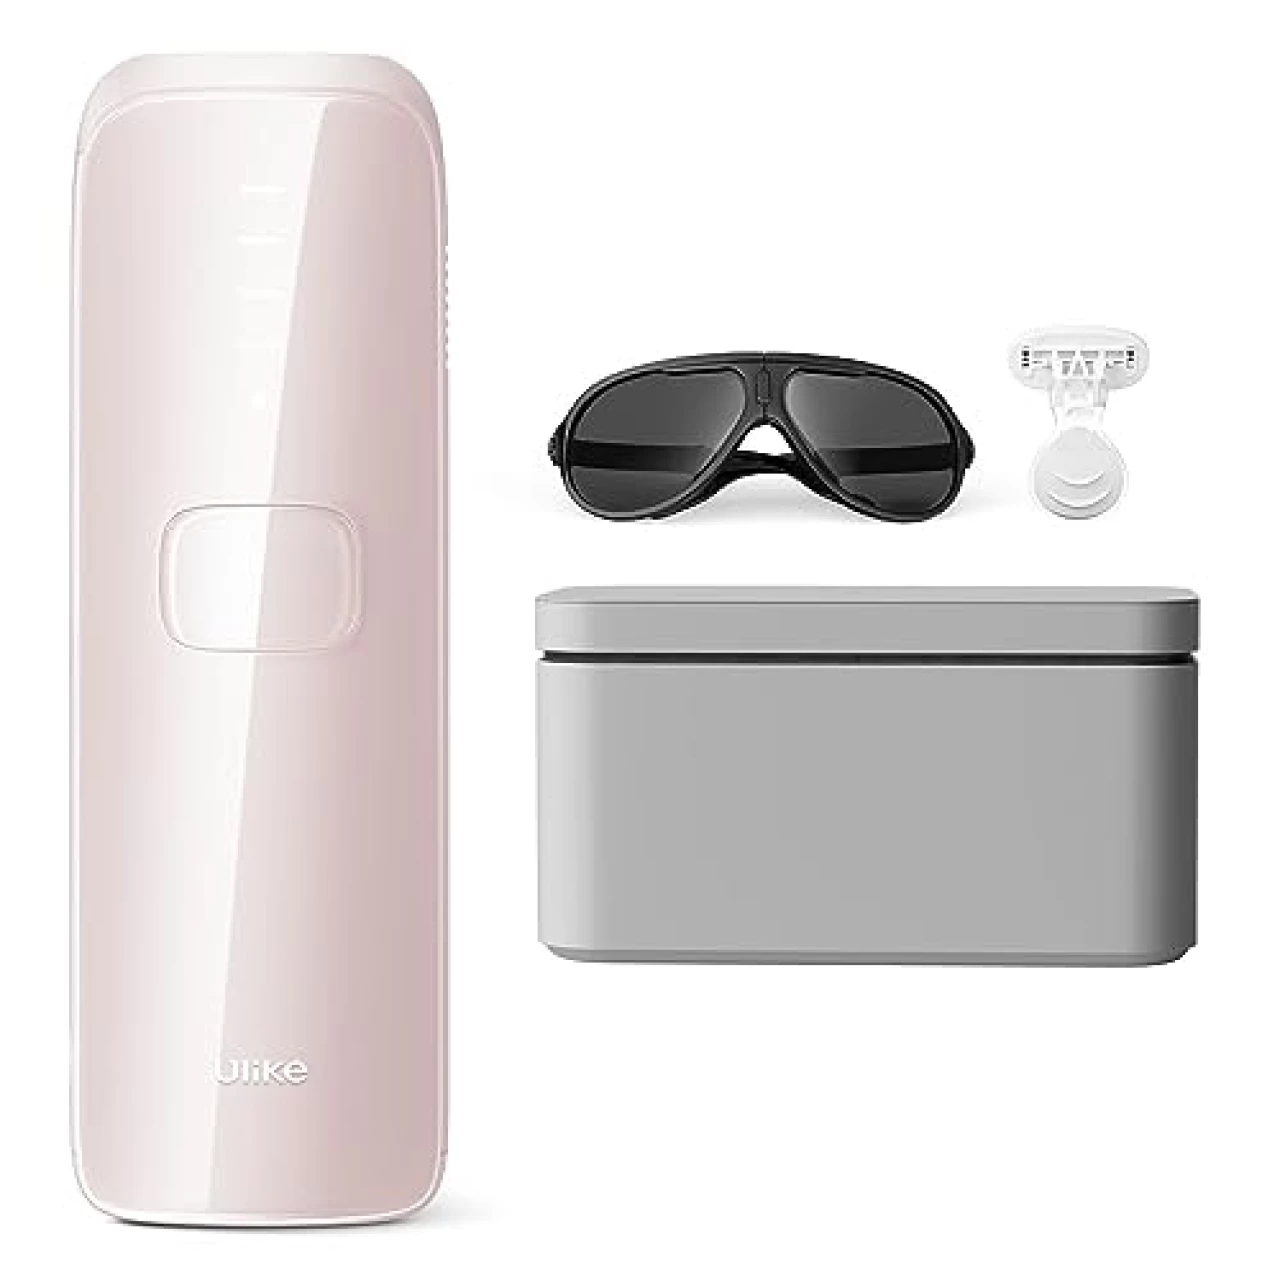 Ulike Laser Hair Removal for Women and Men, Air 3 IPL Hair Removal with Sapphire Ice-Cooling System for Painless &amp; Long-Lasting Result, Flat-Head Design for Body &amp; Face Treatment at-Home, Pink